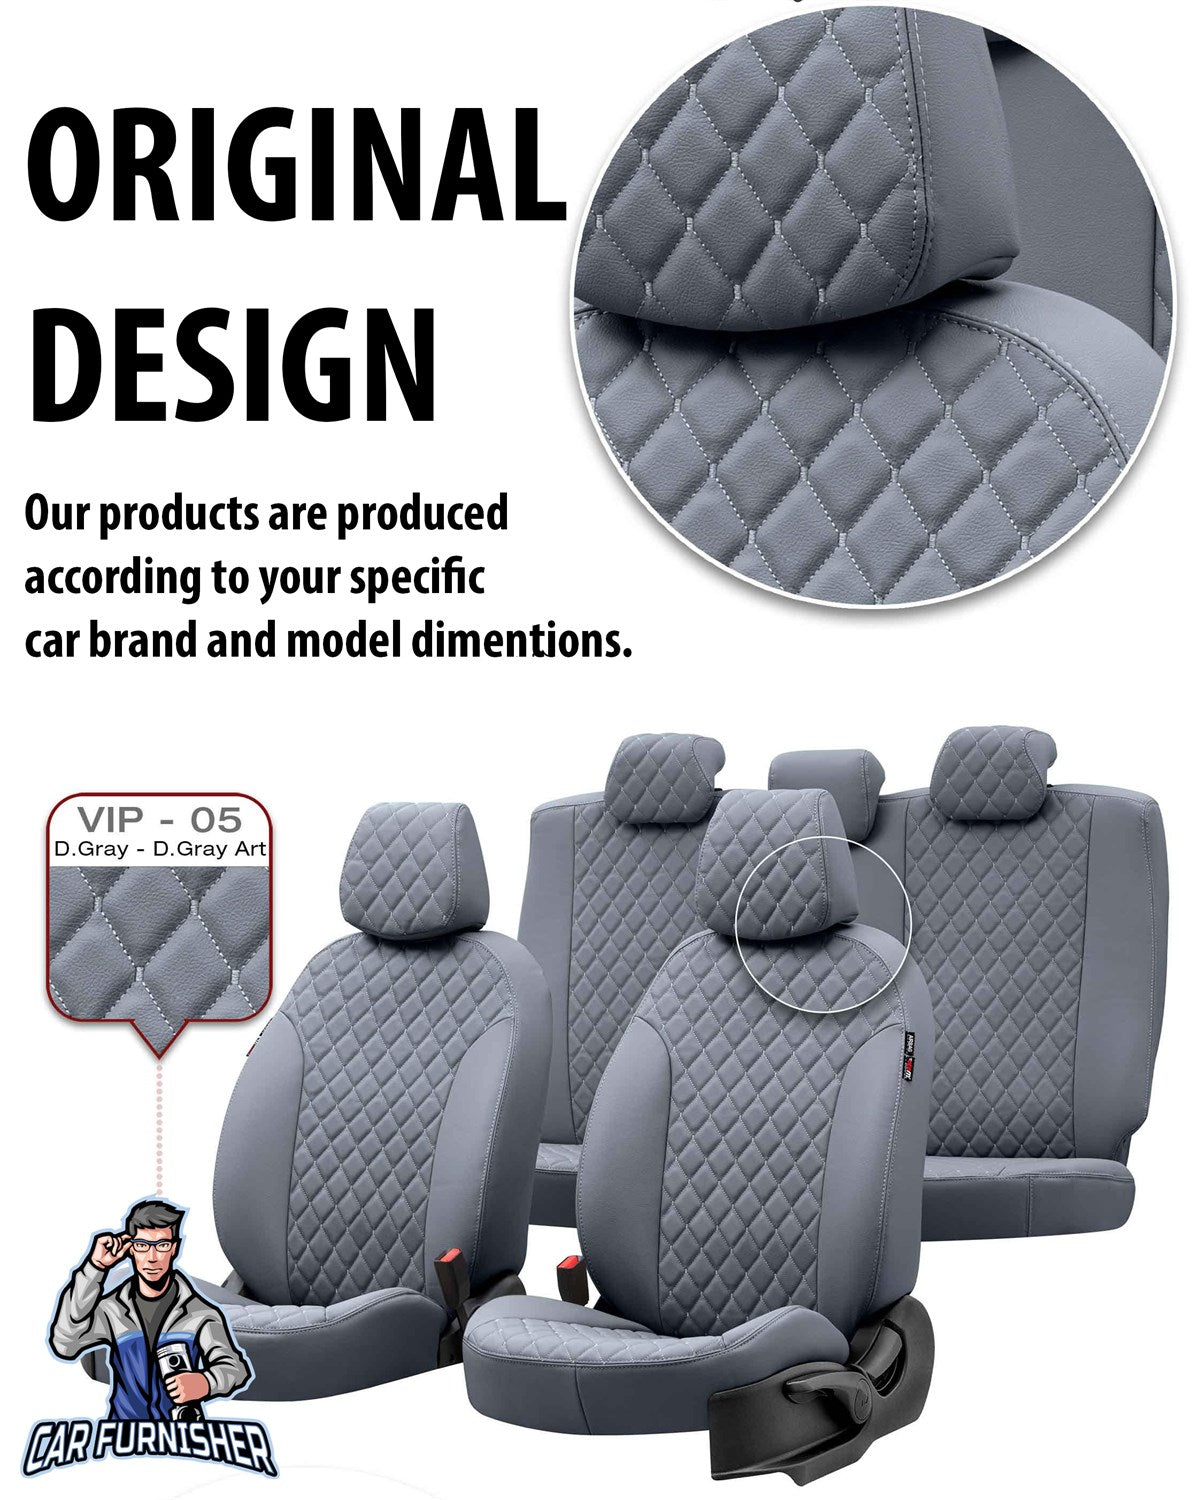 Skoda Roomstar Seat Cover Madrid Leather Design Smoked Leather